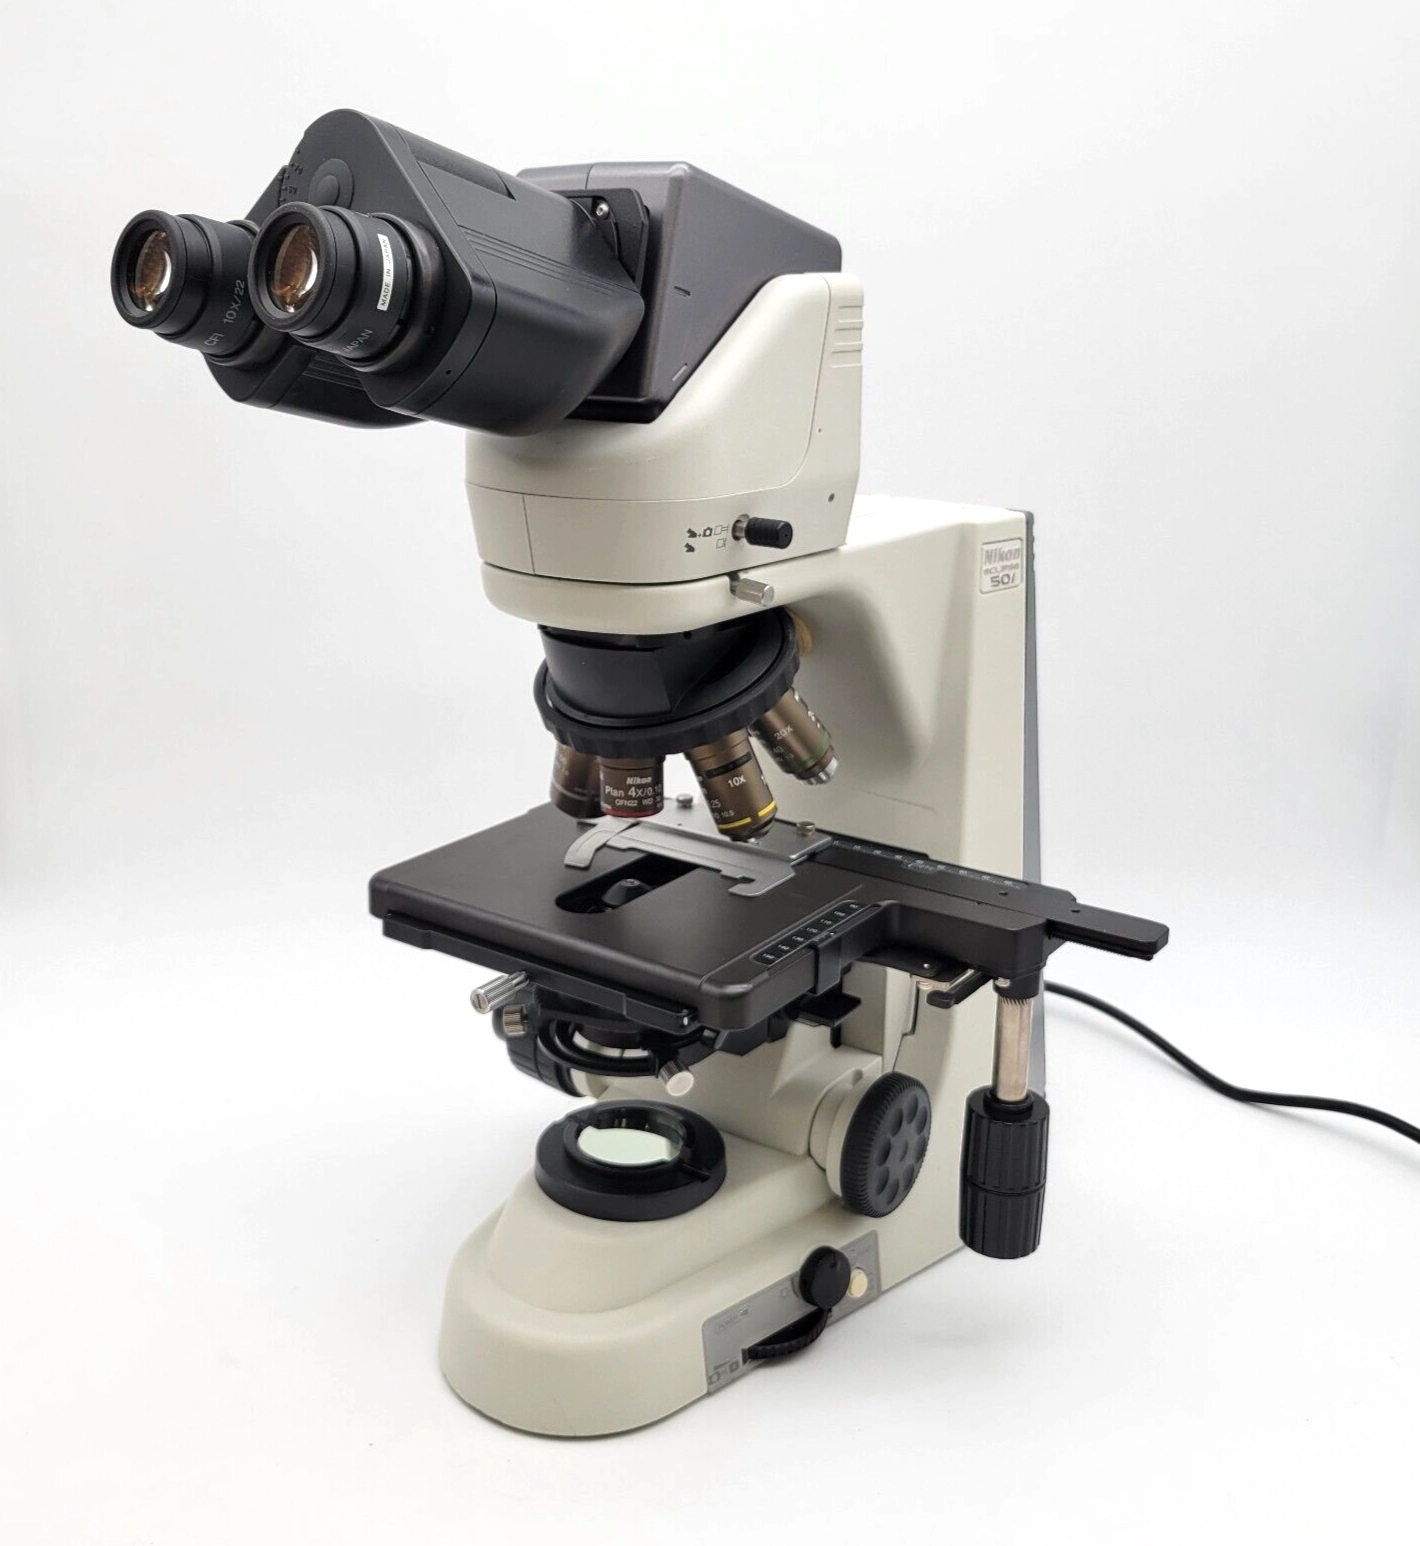 Nikon Microscope Eclipse 50i with Tilting Head &amp; 2x Objective for Pathology/Mohs